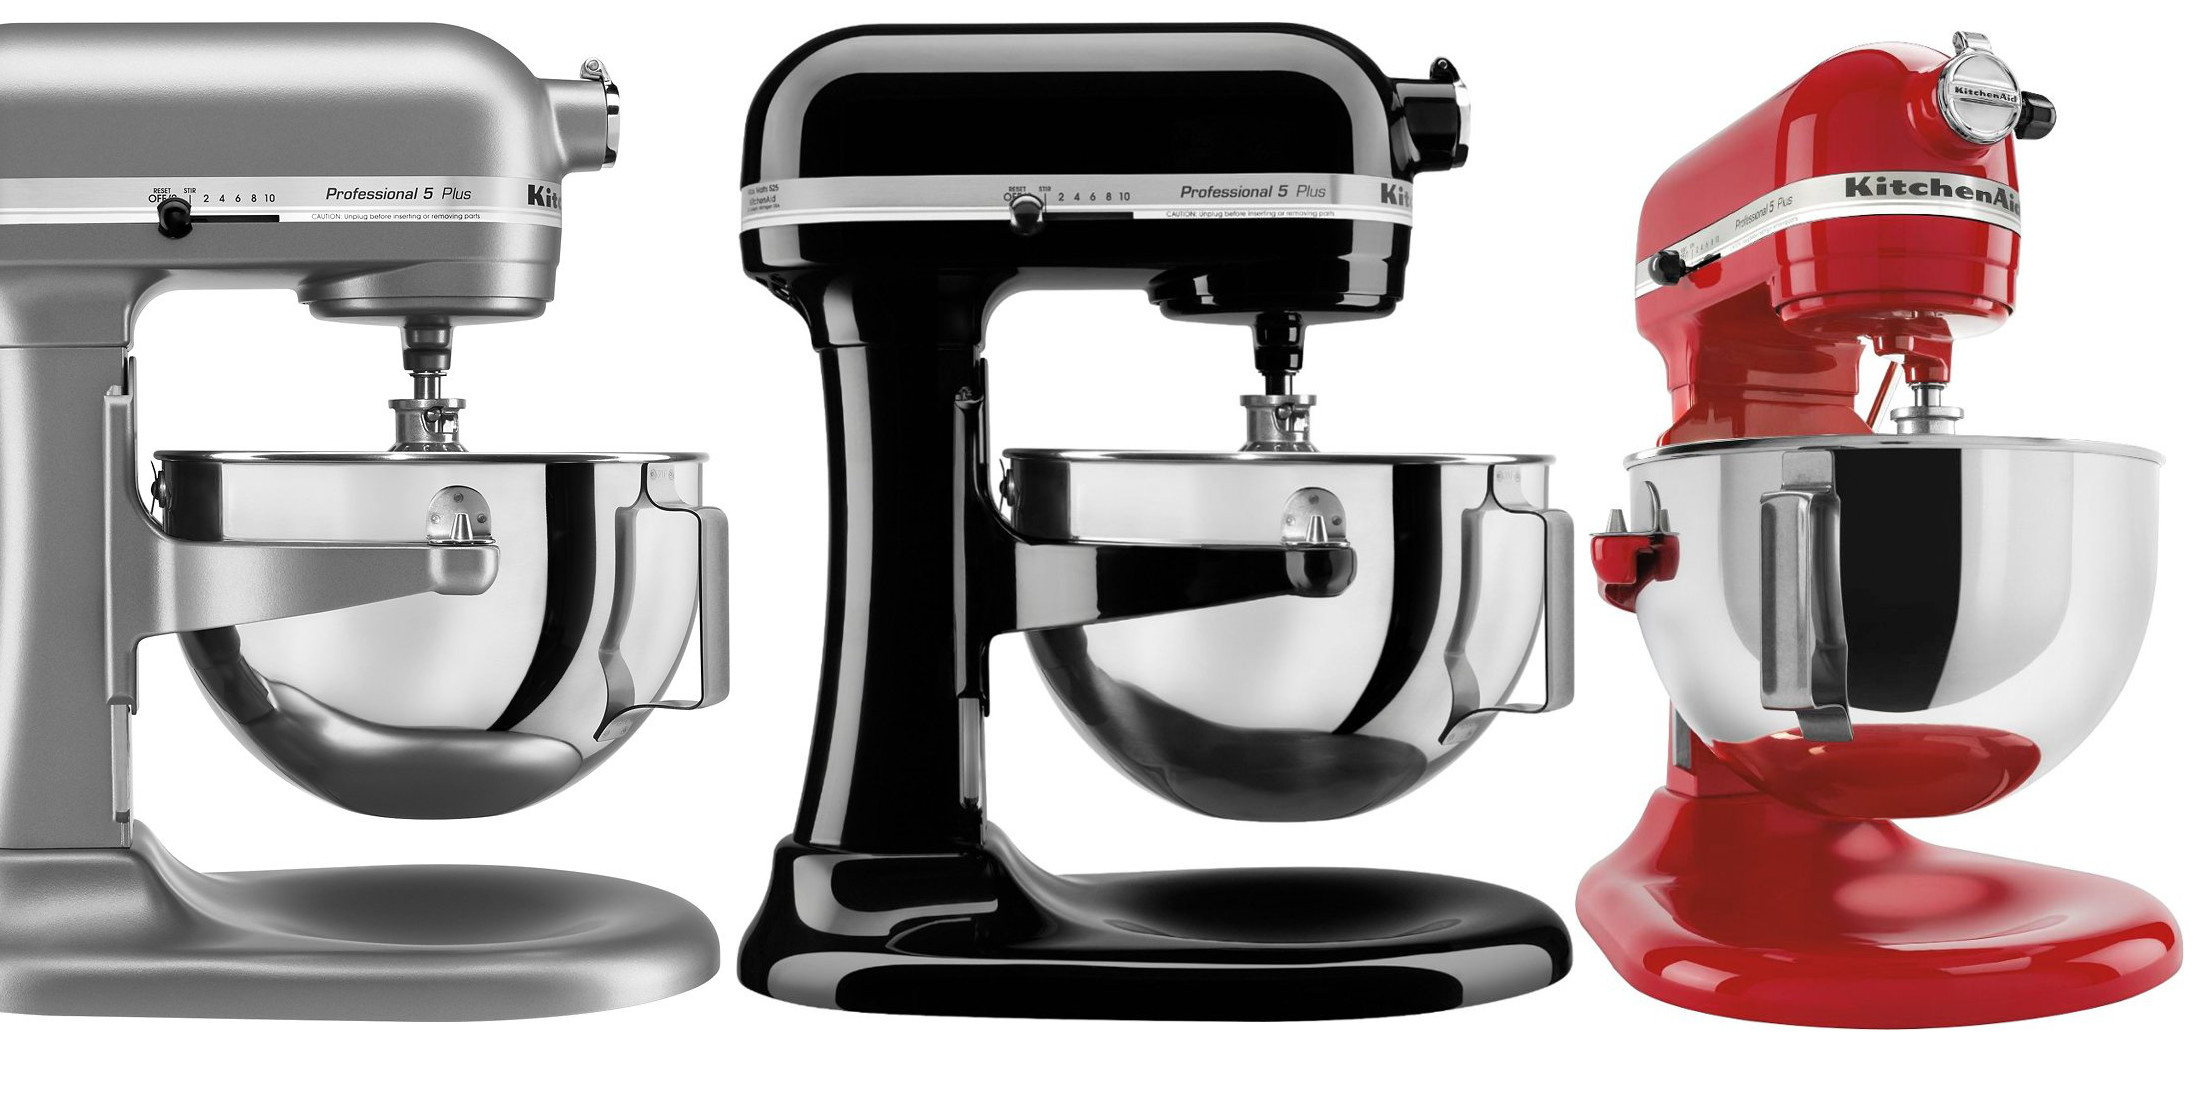 Jump up to the KitchenAid Pro 500 Series Stand Mixer at as much as $300